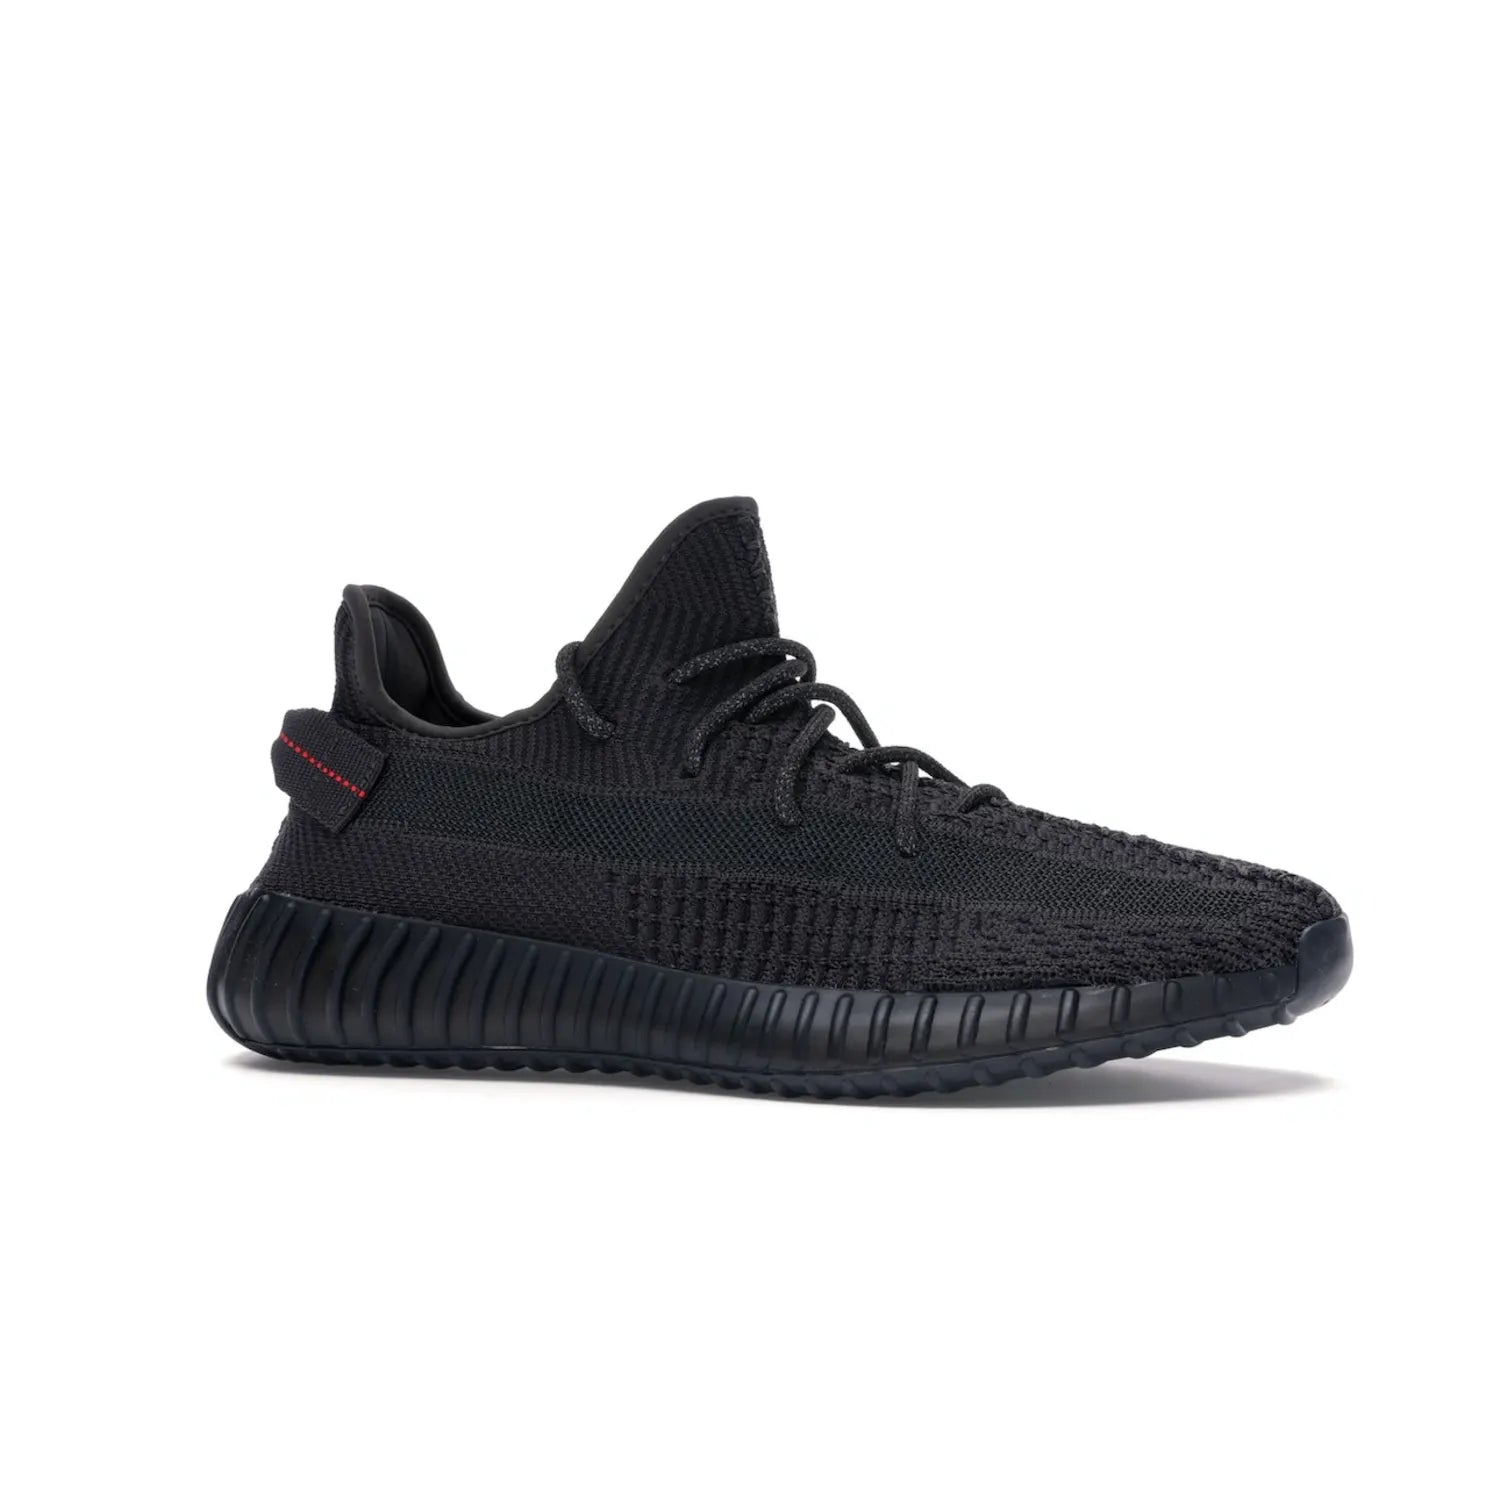 adidas Yeezy Boost 350 V2 Black (Non-Reflective) - Image 3 - Only at www.BallersClubKickz.com - A timeless, sleek silhouette crafted from quality materials. The adidas Yeezy Boost 350 V2 Black (Non-Reflective) brings style and sophistication. Get yours now!